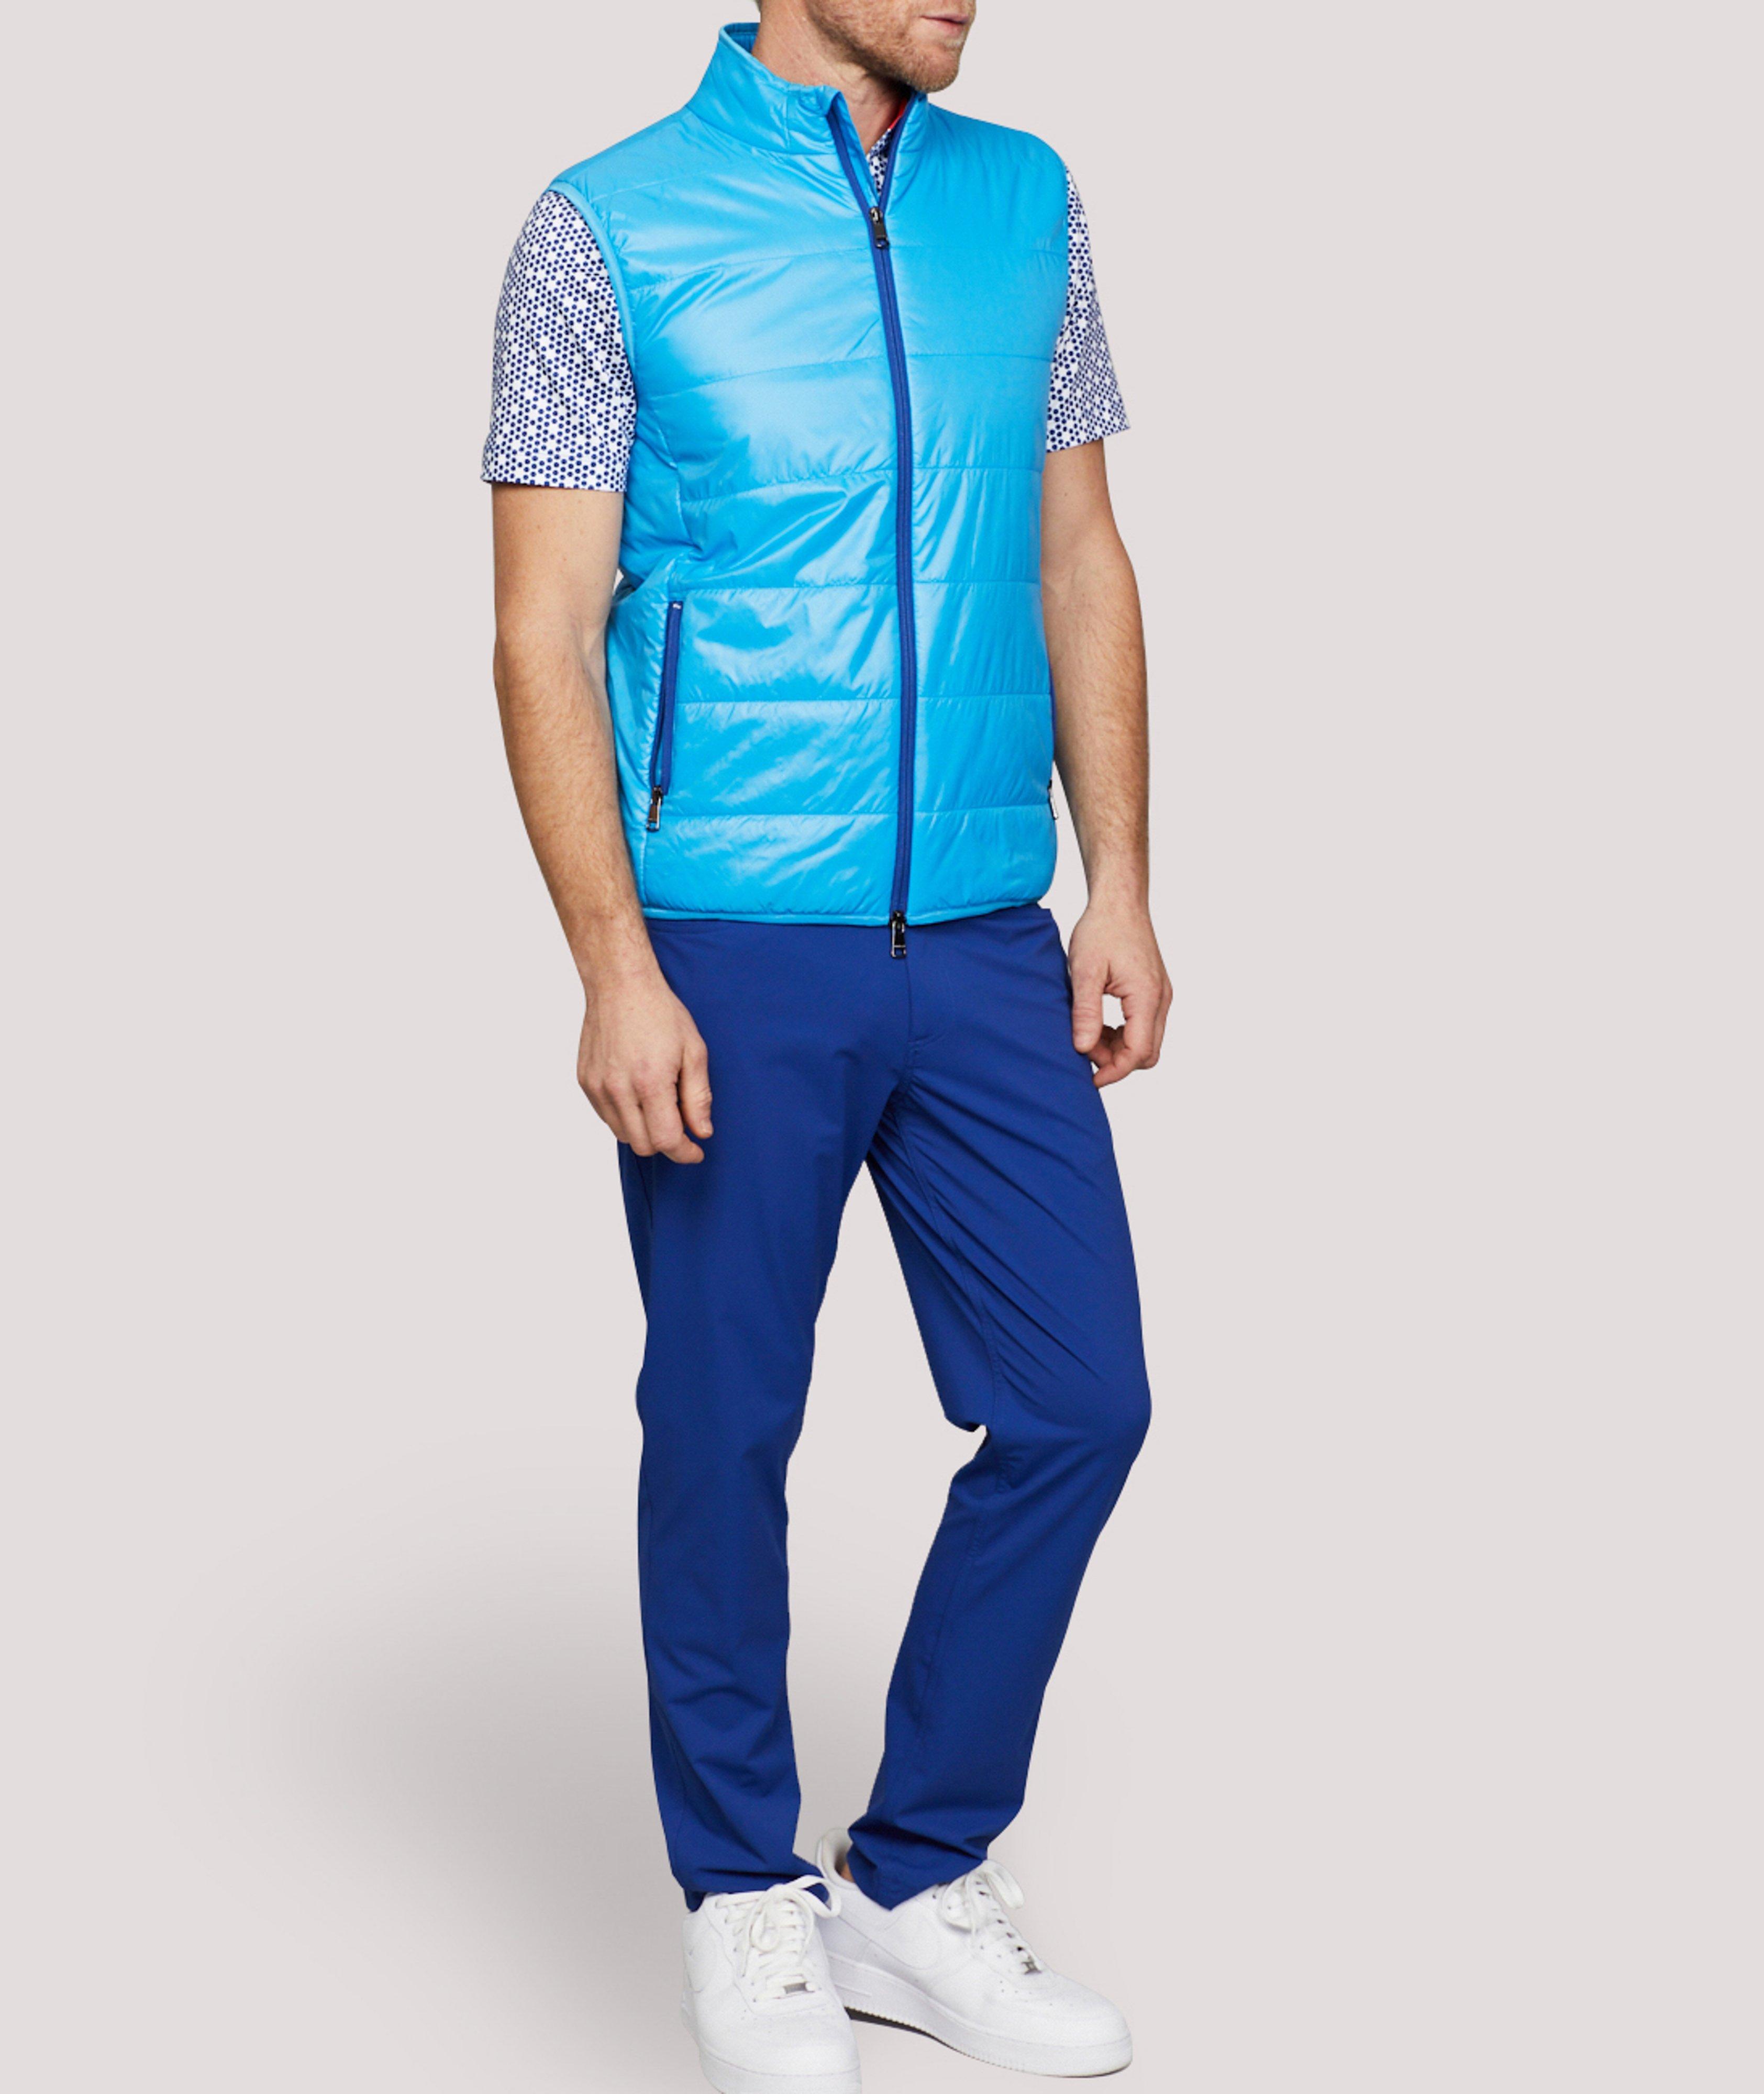 Bolton Quilted Technical Fabric Vest